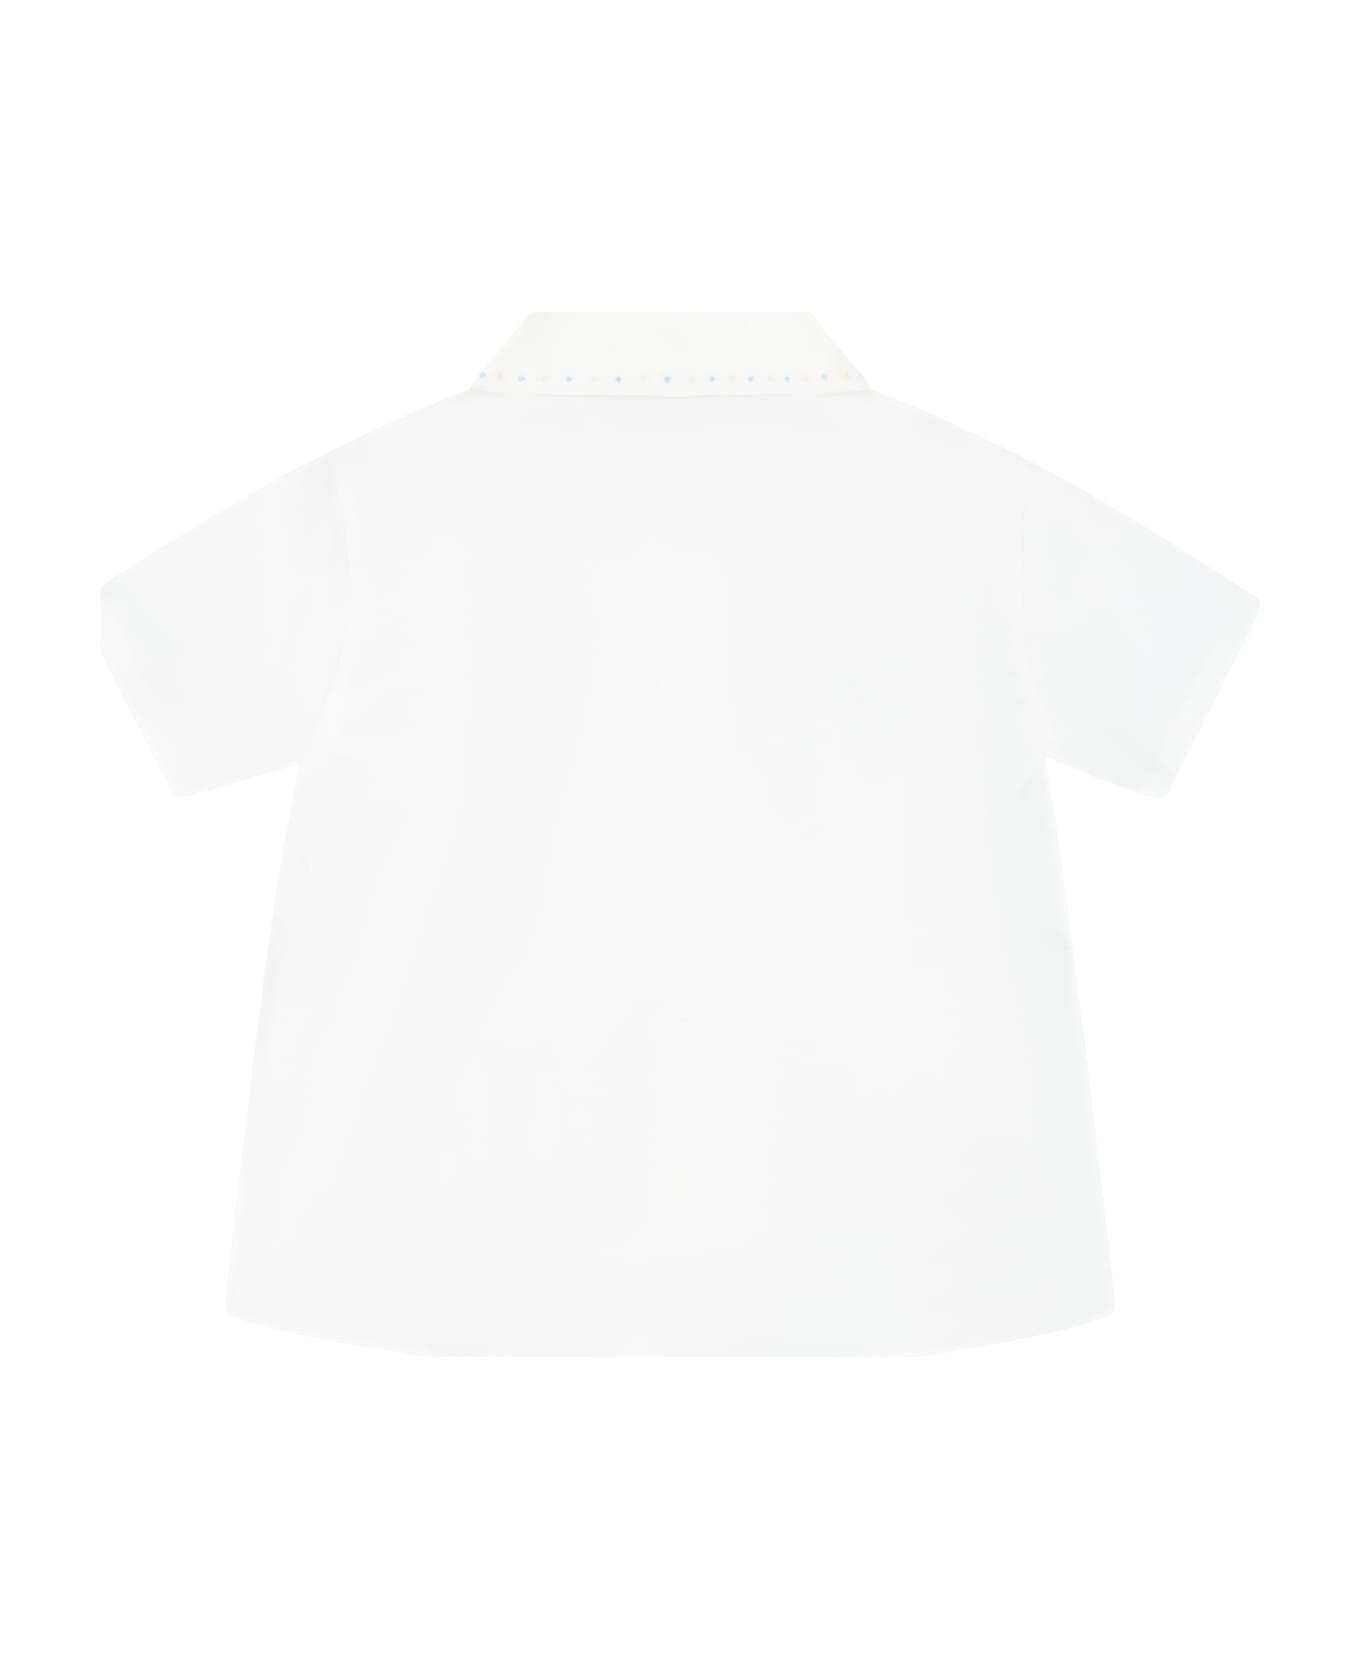 Gucci White Shirt For Baby Boy With Polka Dots - Ivory